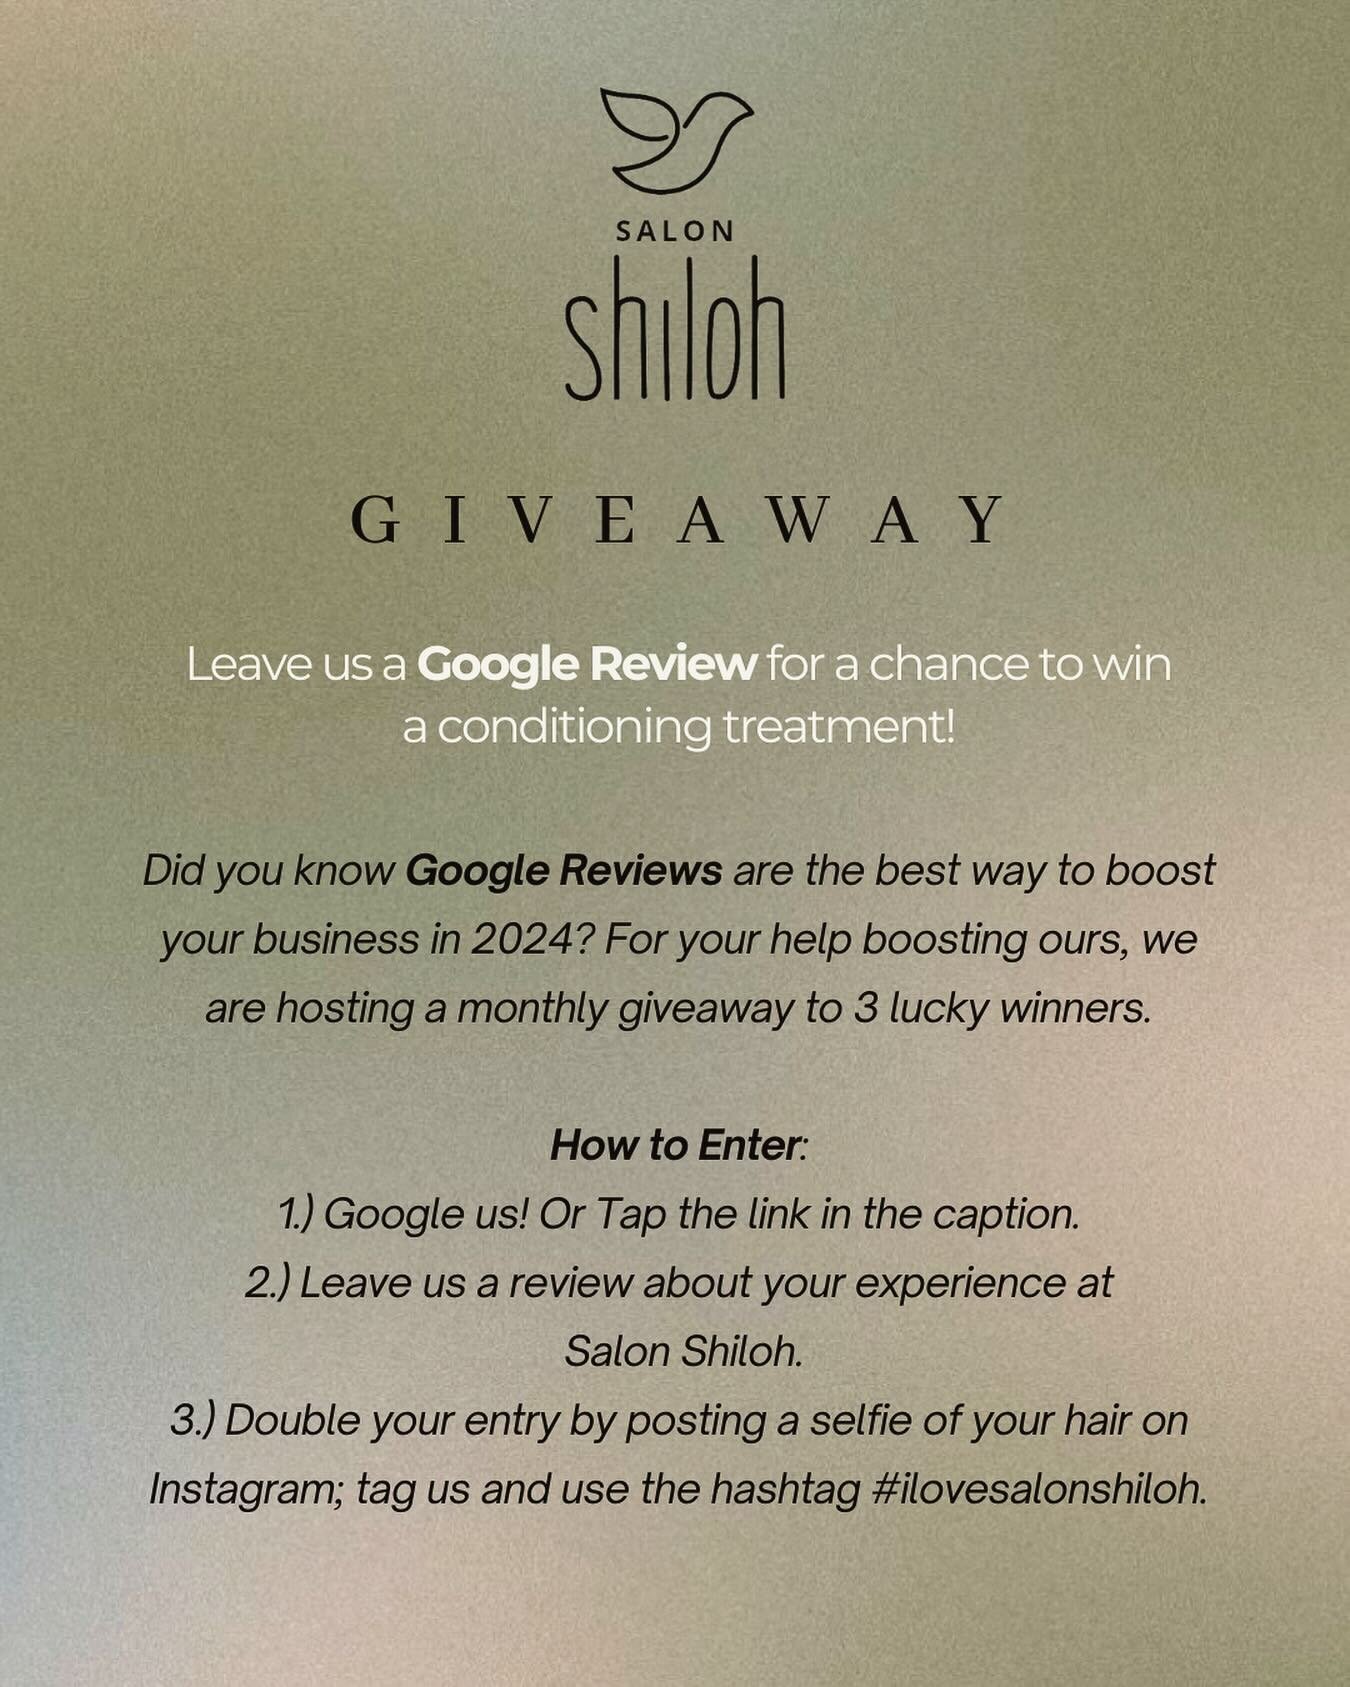 ENTER OUR GIVEAWAY&mdash; Details ⬇️ 

Leave us a Google review to help grow our business- we want to hear from you! In 2024, we will give you a chance to win a conditioning treatment on us. 

TO ENTER: 
1. Google us! Or click the link in our bio
2. 